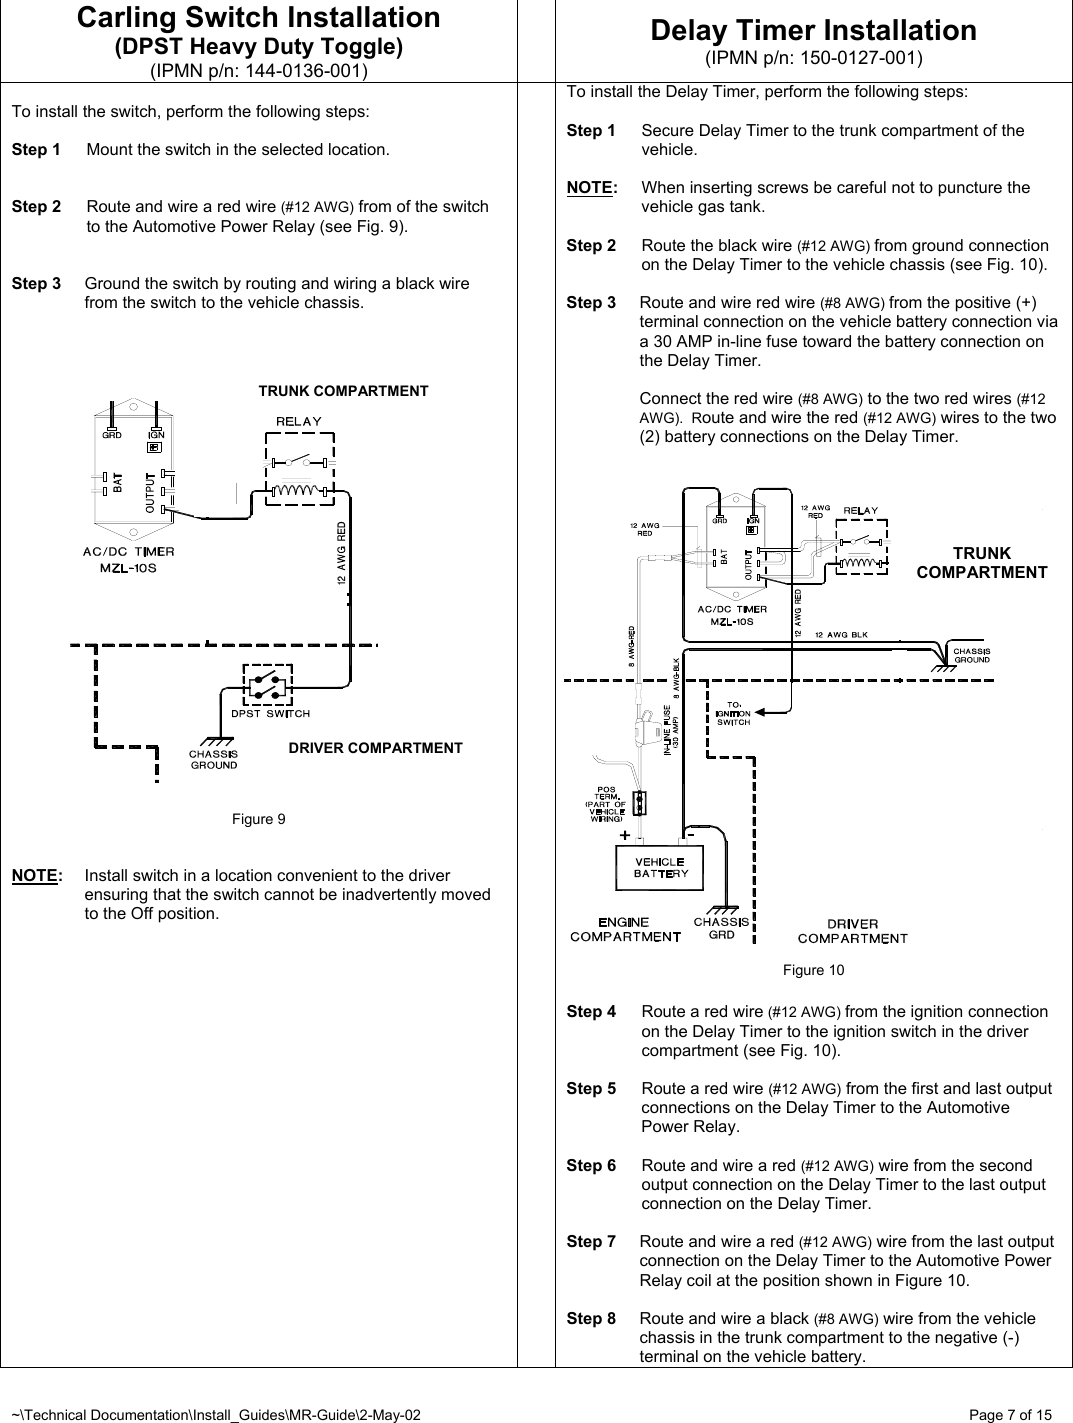 ~\Technical Documentation\Install_Guides\MR-Guide\2-May-02   Page 7 of 15 TRUNK COMPARTMENT TRUNK COMPARTMENT DRIVER COMPARTMENT Carling Switch Installation (DPST Heavy Duty Toggle) (IPMN p/n: 144-0136-001)  Delay Timer Installation (IPMN p/n: 150-0127-001)  To install the switch, perform the following steps:  Step 1  Mount the switch in the selected location.   Step 2  Route and wire a red wire (#12 AWG) from of the switch to the Automotive Power Relay (see Fig. 9).   Step 3  Ground the switch by routing and wiring a black wire from the switch to the vehicle chassis.                            Figure 9   NOTE:  Install switch in a location convenient to the driver ensuring that the switch cannot be inadvertently moved to the Off position.  To install the Delay Timer, perform the following steps:  Step 1  Secure Delay Timer to the trunk compartment of the vehicle.  NOTE:  When inserting screws be careful not to puncture the vehicle gas tank.  Step 2  Route the black wire (#12 AWG) from ground connection on the Delay Timer to the vehicle chassis (see Fig. 10).  Step 3  Route and wire red wire (#8 AWG) from the positive (+) terminal connection on the vehicle battery connection via a 30 AMP in-line fuse toward the battery connection on the Delay Timer.    Connect the red wire (#8 AWG) to the two red wires (#12 AWG).  Route and wire the red (#12 AWG) wires to the two (2) battery connections on the Delay Timer.                       Figure 10  Step 4  Route a red wire (#12 AWG) from the ignition connection on the Delay Timer to the ignition switch in the driver compartment (see Fig. 10).  Step 5  Route a red wire (#12 AWG) from the first and last output connections on the Delay Timer to the Automotive Power Relay.  Step 6  Route and wire a red (#12 AWG) wire from the second output connection on the Delay Timer to the last output connection on the Delay Timer.   Step 7  Route and wire a red (#12 AWG) wire from the last output connection on the Delay Timer to the Automotive Power Relay coil at the position shown in Figure 10.  Step 8  Route and wire a black (#8 AWG) wire from the vehicle chassis in the trunk compartment to the negative (-) terminal on the vehicle battery. 